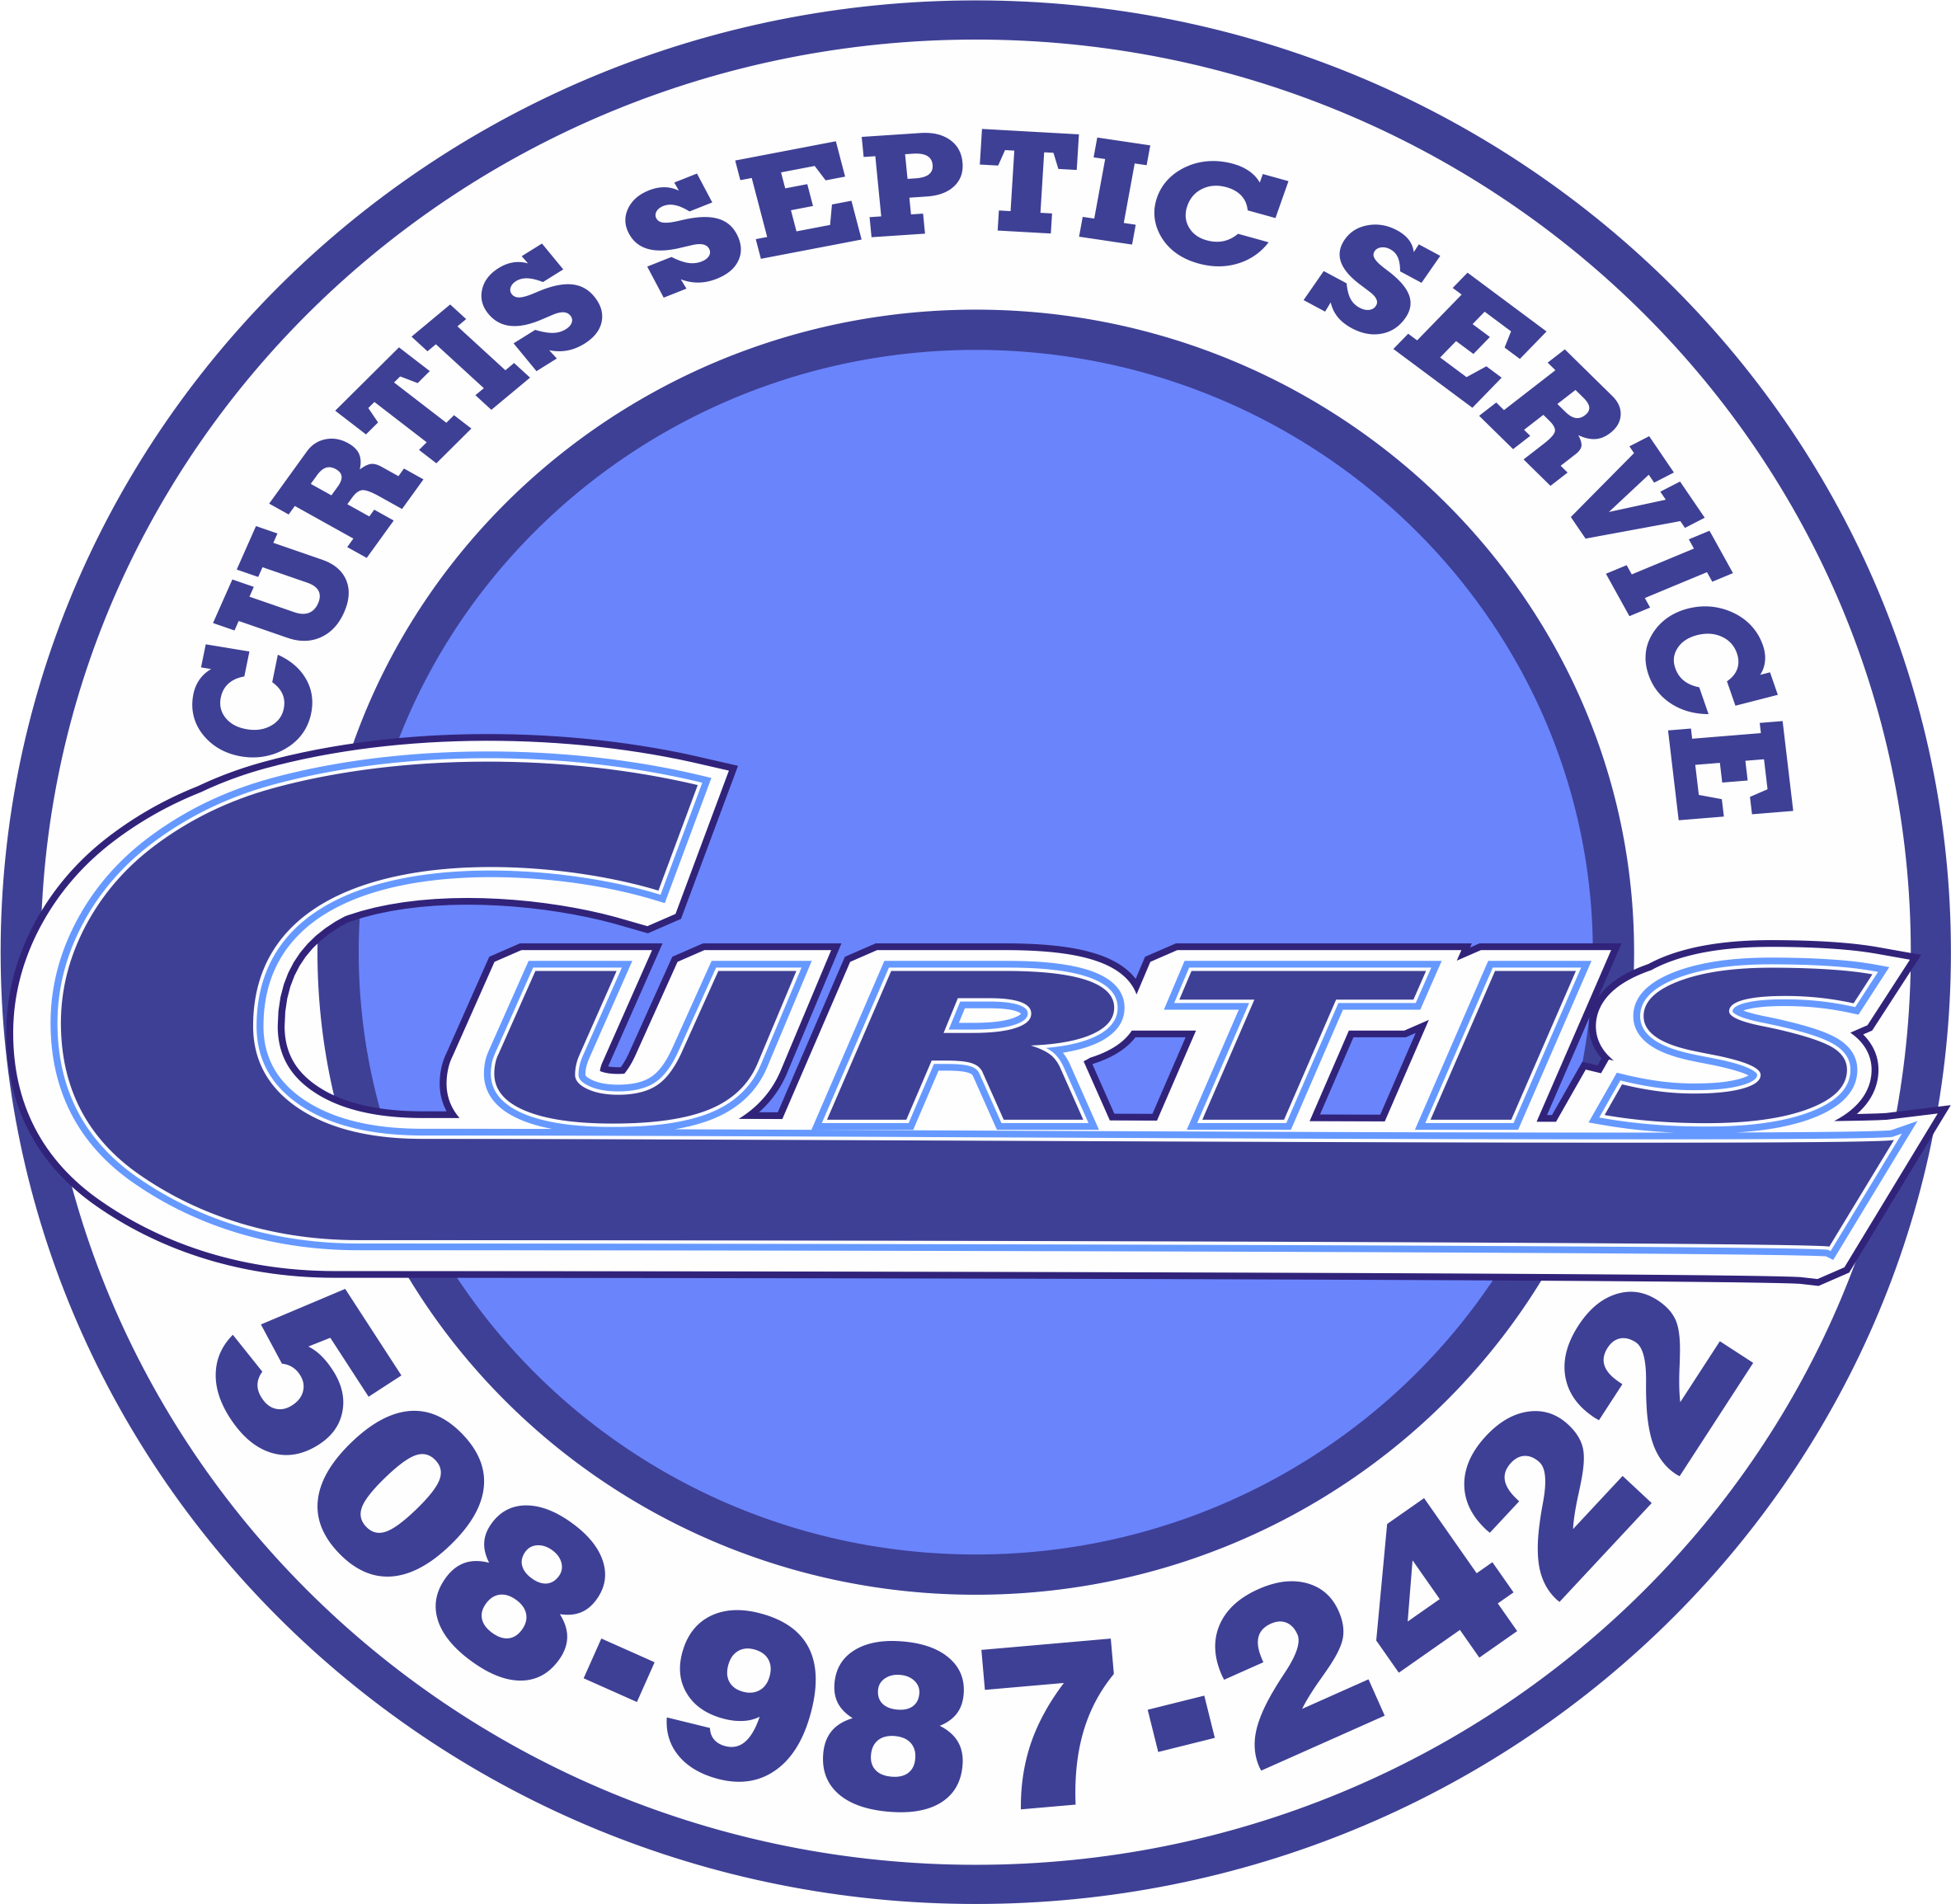 New Septic Systems in Massachusetts